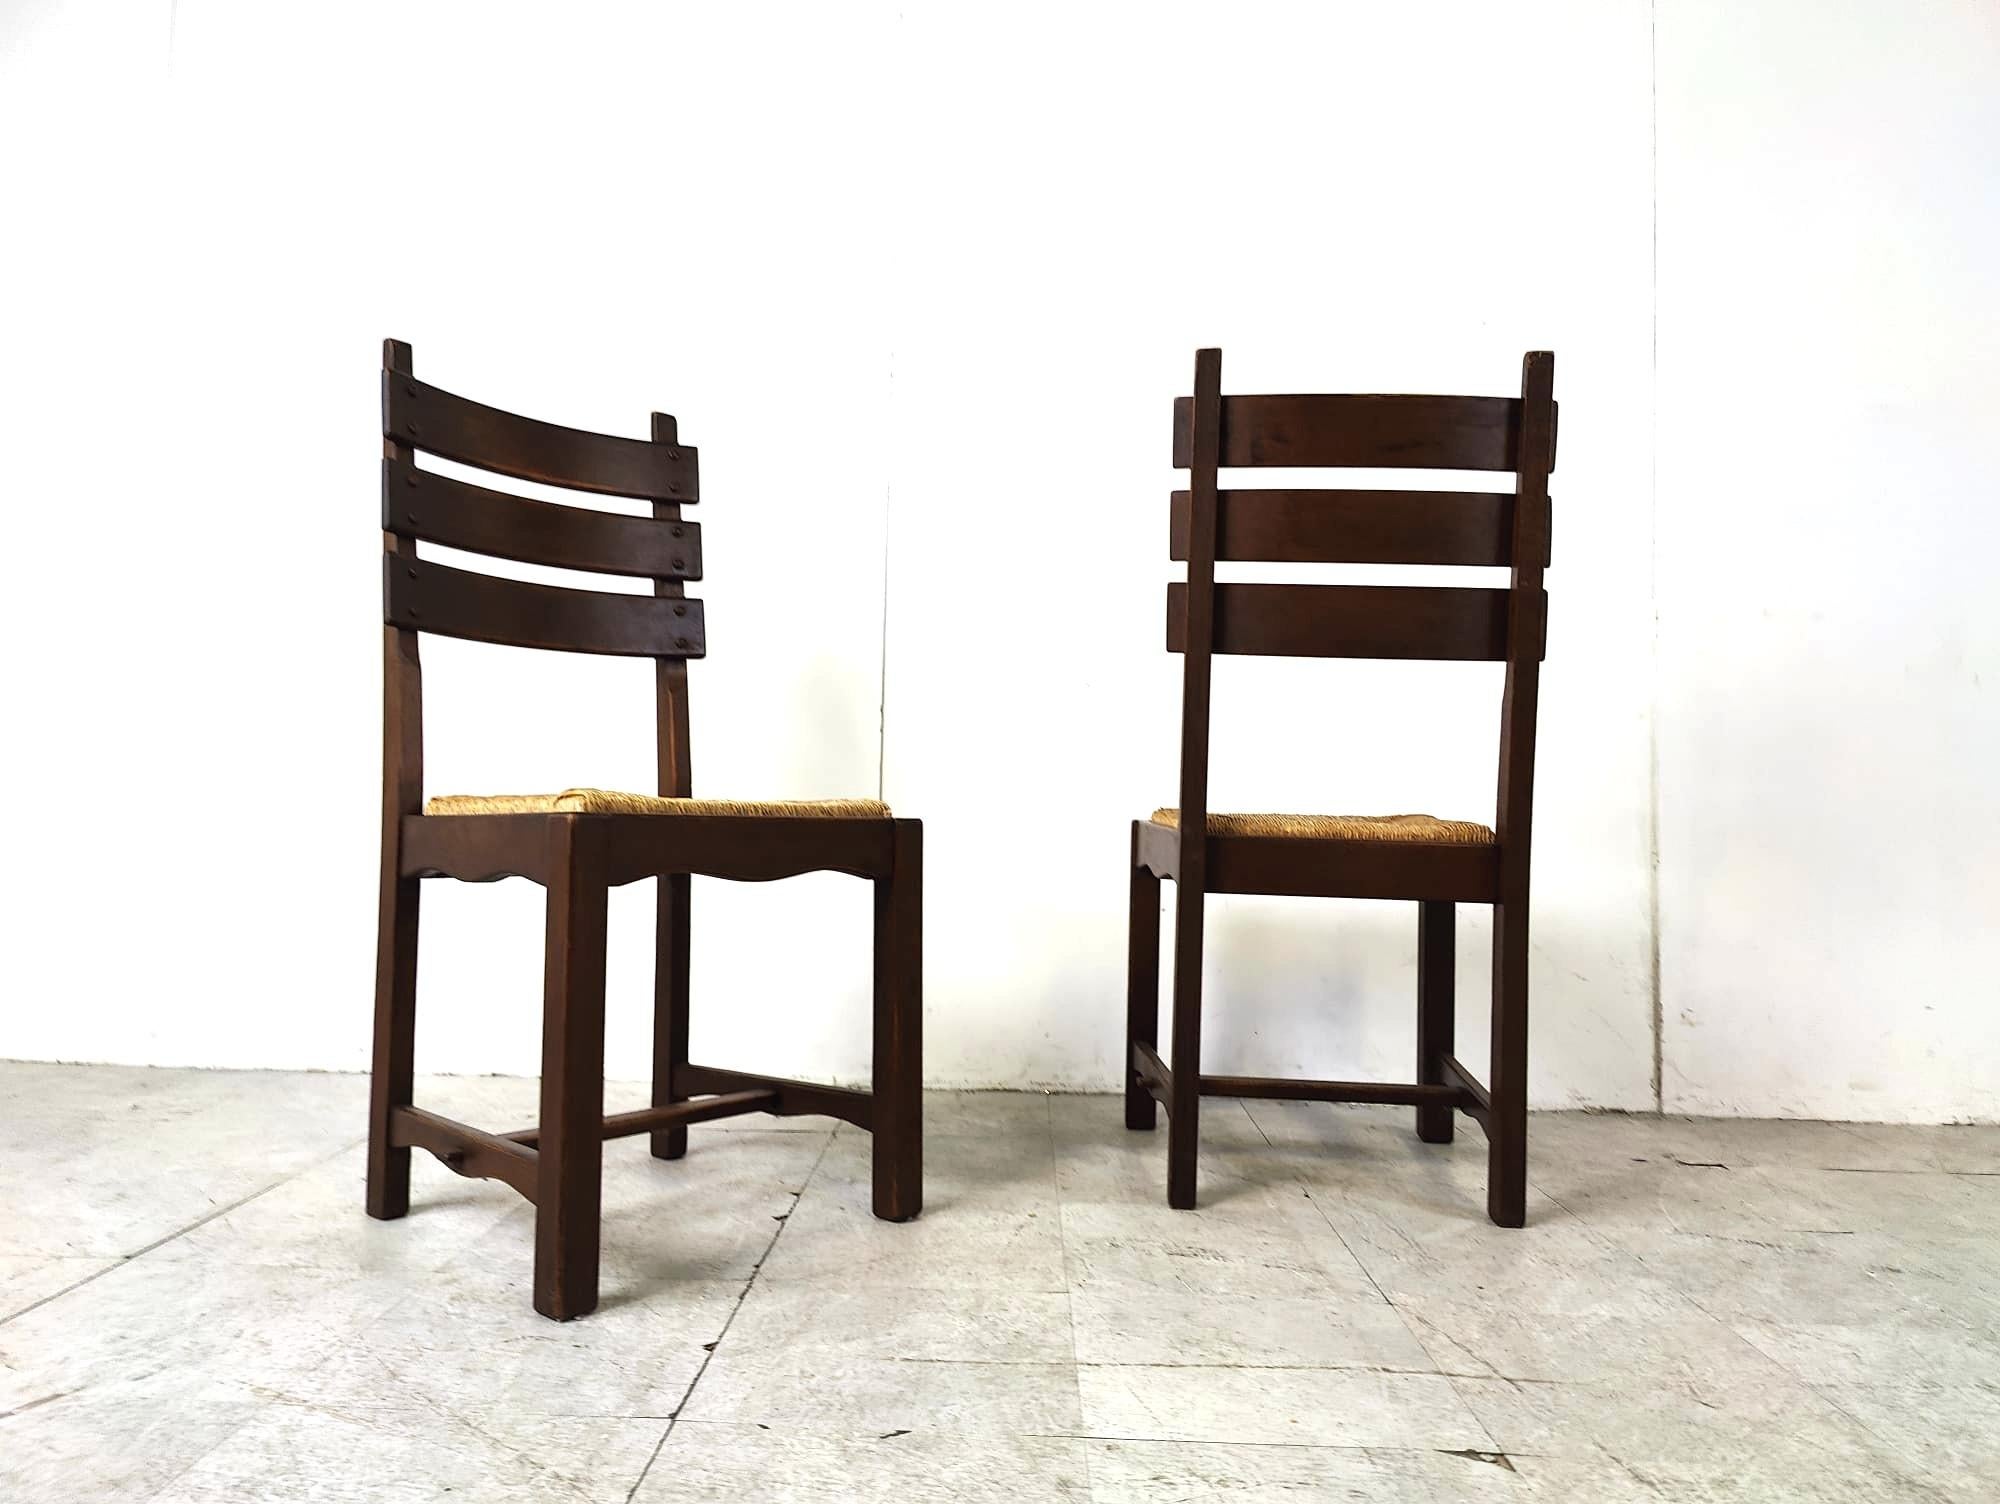 Vintage sturdy oak and wicker brutalist style dining chairs.

Sturdy ever lasting oak frames with thick wicker seats.

The high backrests are a key design feauture for these chairs.

1960s - Belgium

Good overall condition.

Dimensions:
Height: